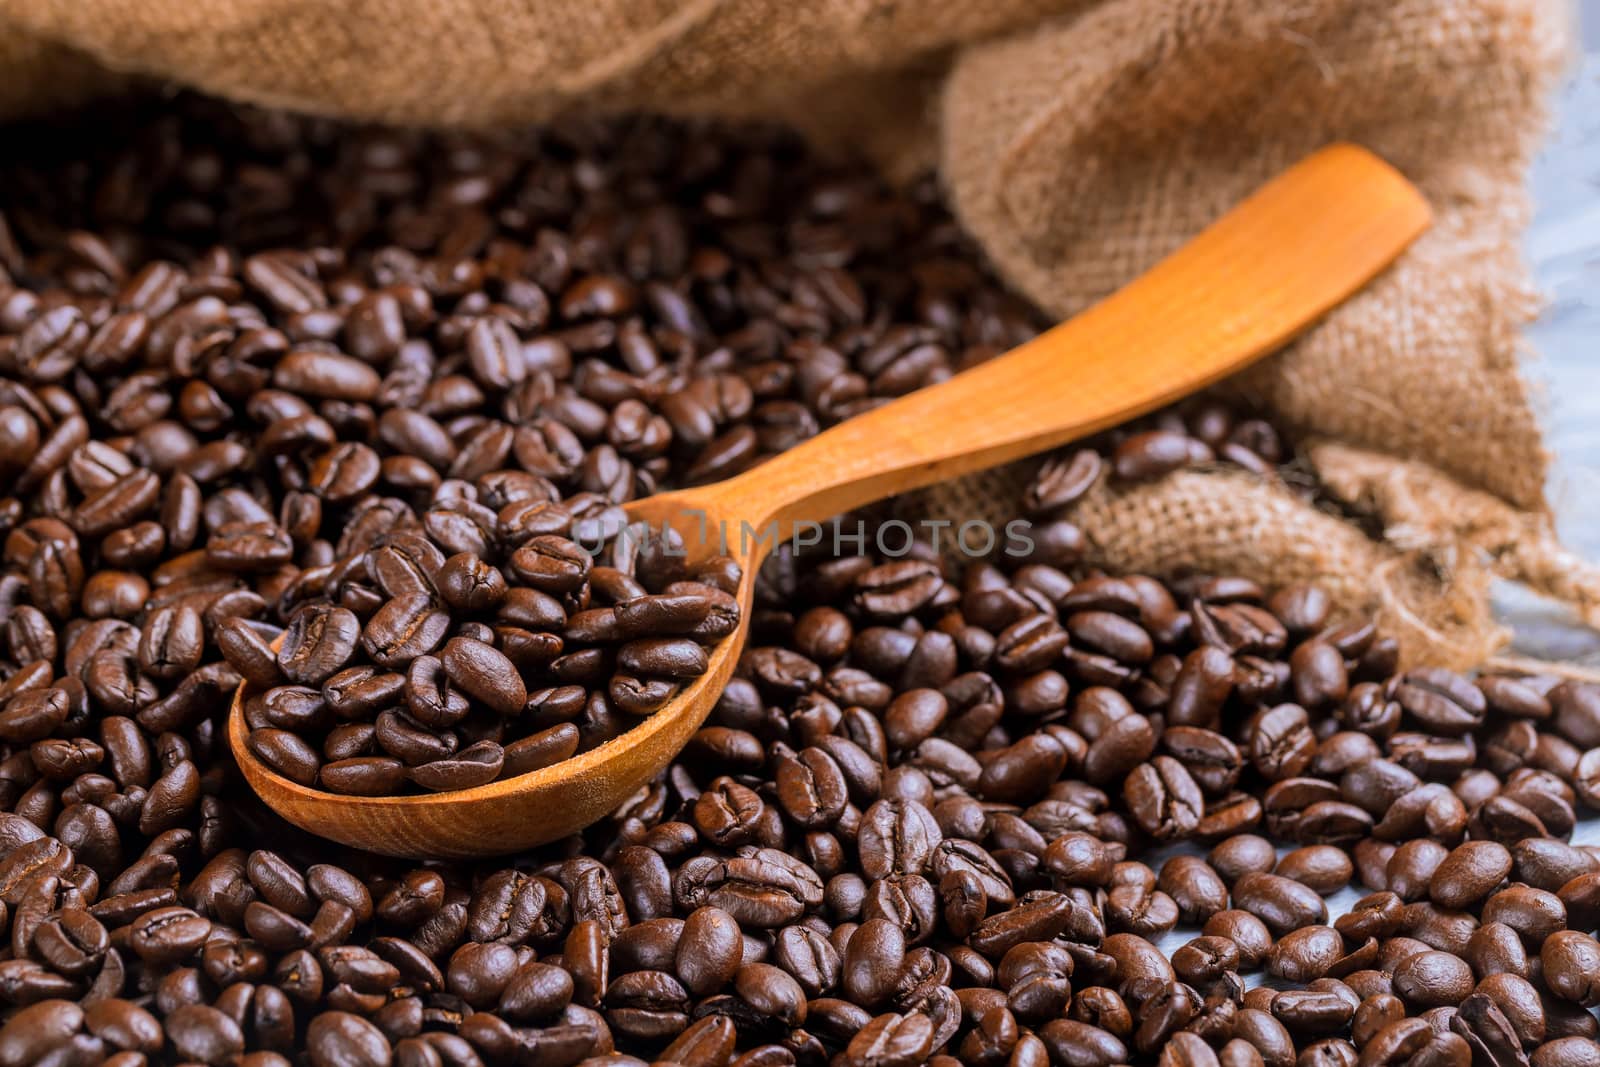 Black coffee beans in bag with wooden spoon.